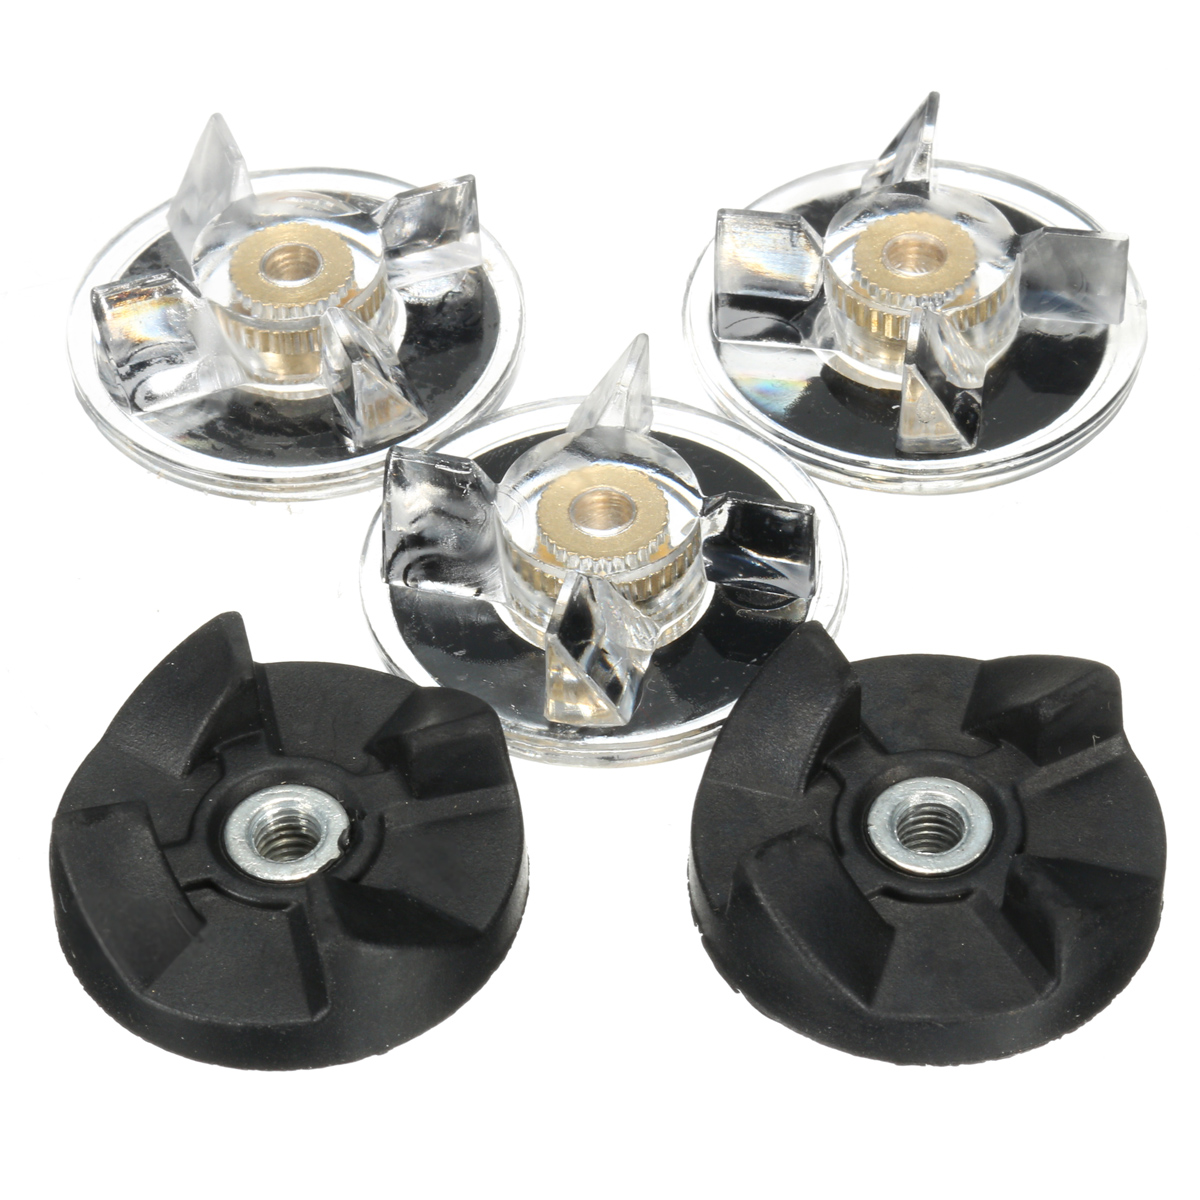 

3 Plastic Gear Base and 2 Rubber Blender Replacement for Magic Mixer Spare Parts